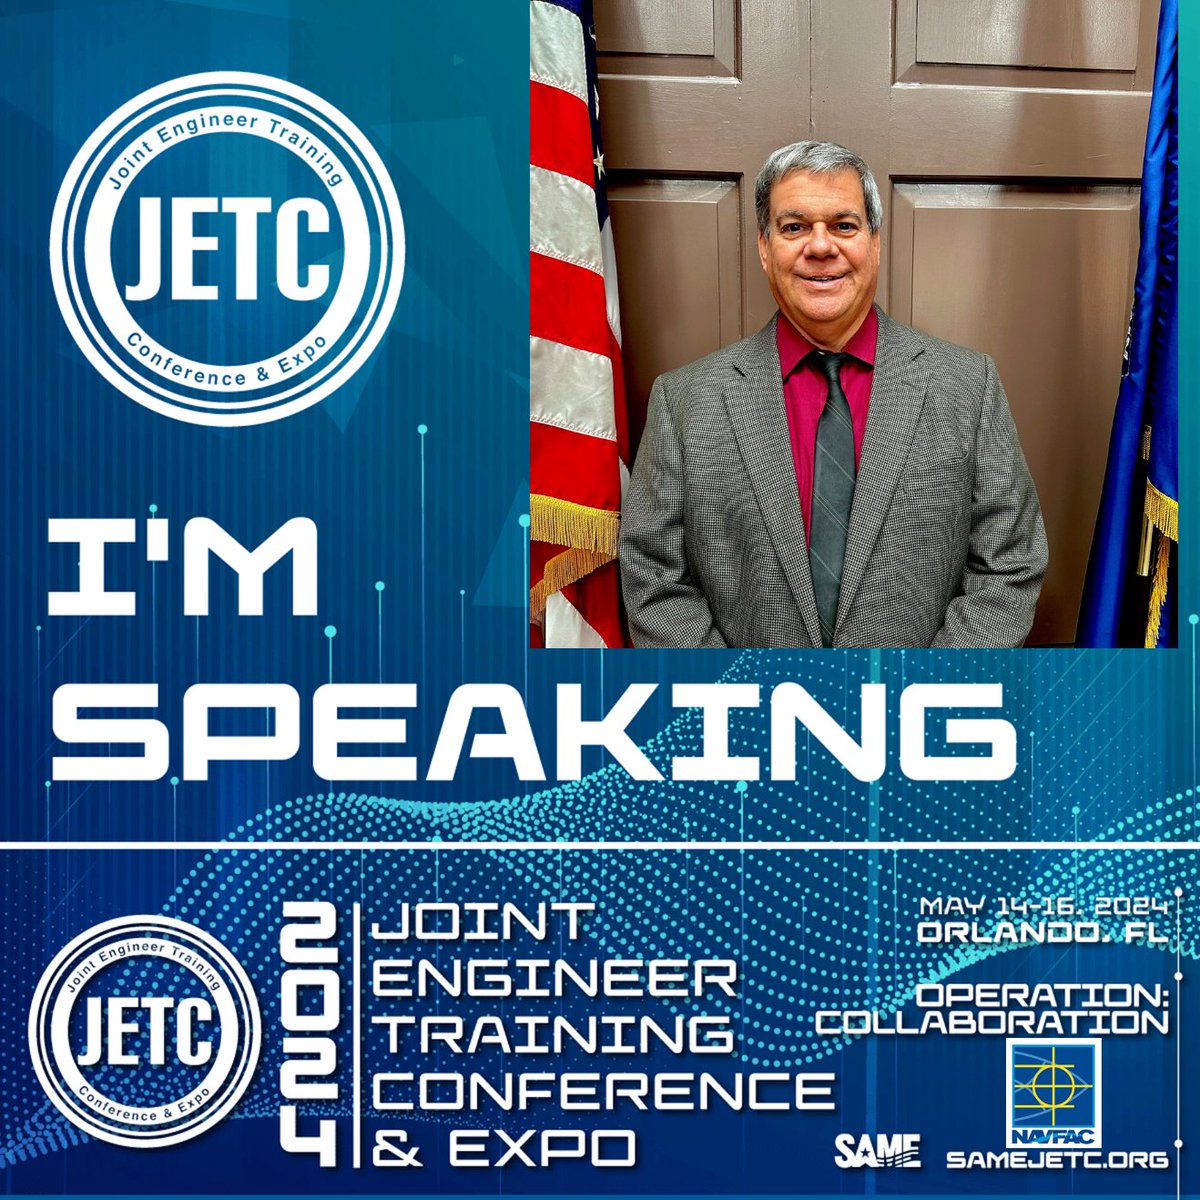 Will you be attending the Joint Engineer Training Conference & Expo? #JETC2024